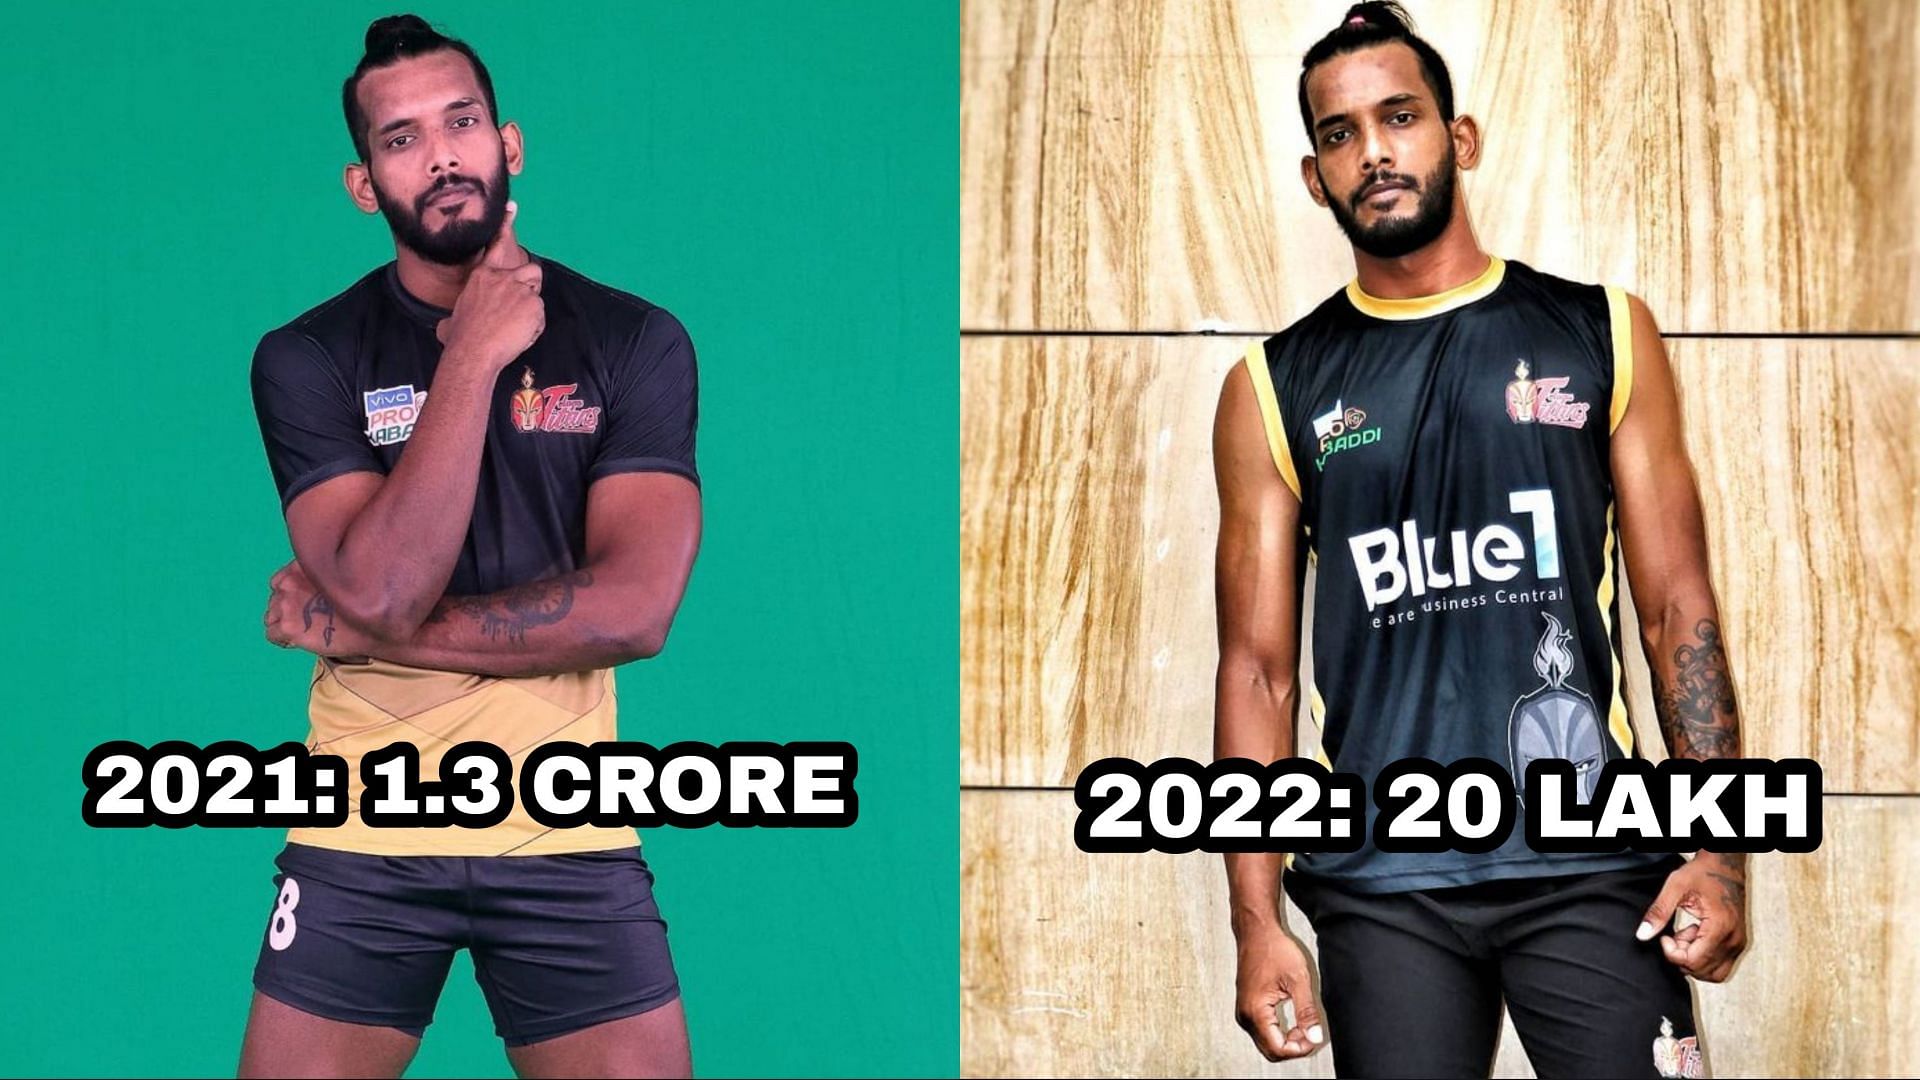 Siddharth Desai&#039;s Pro Kabaddi 2022 salary has reduced by 1.1 crore as compared to his 2021 salary. (Image: Instagram)